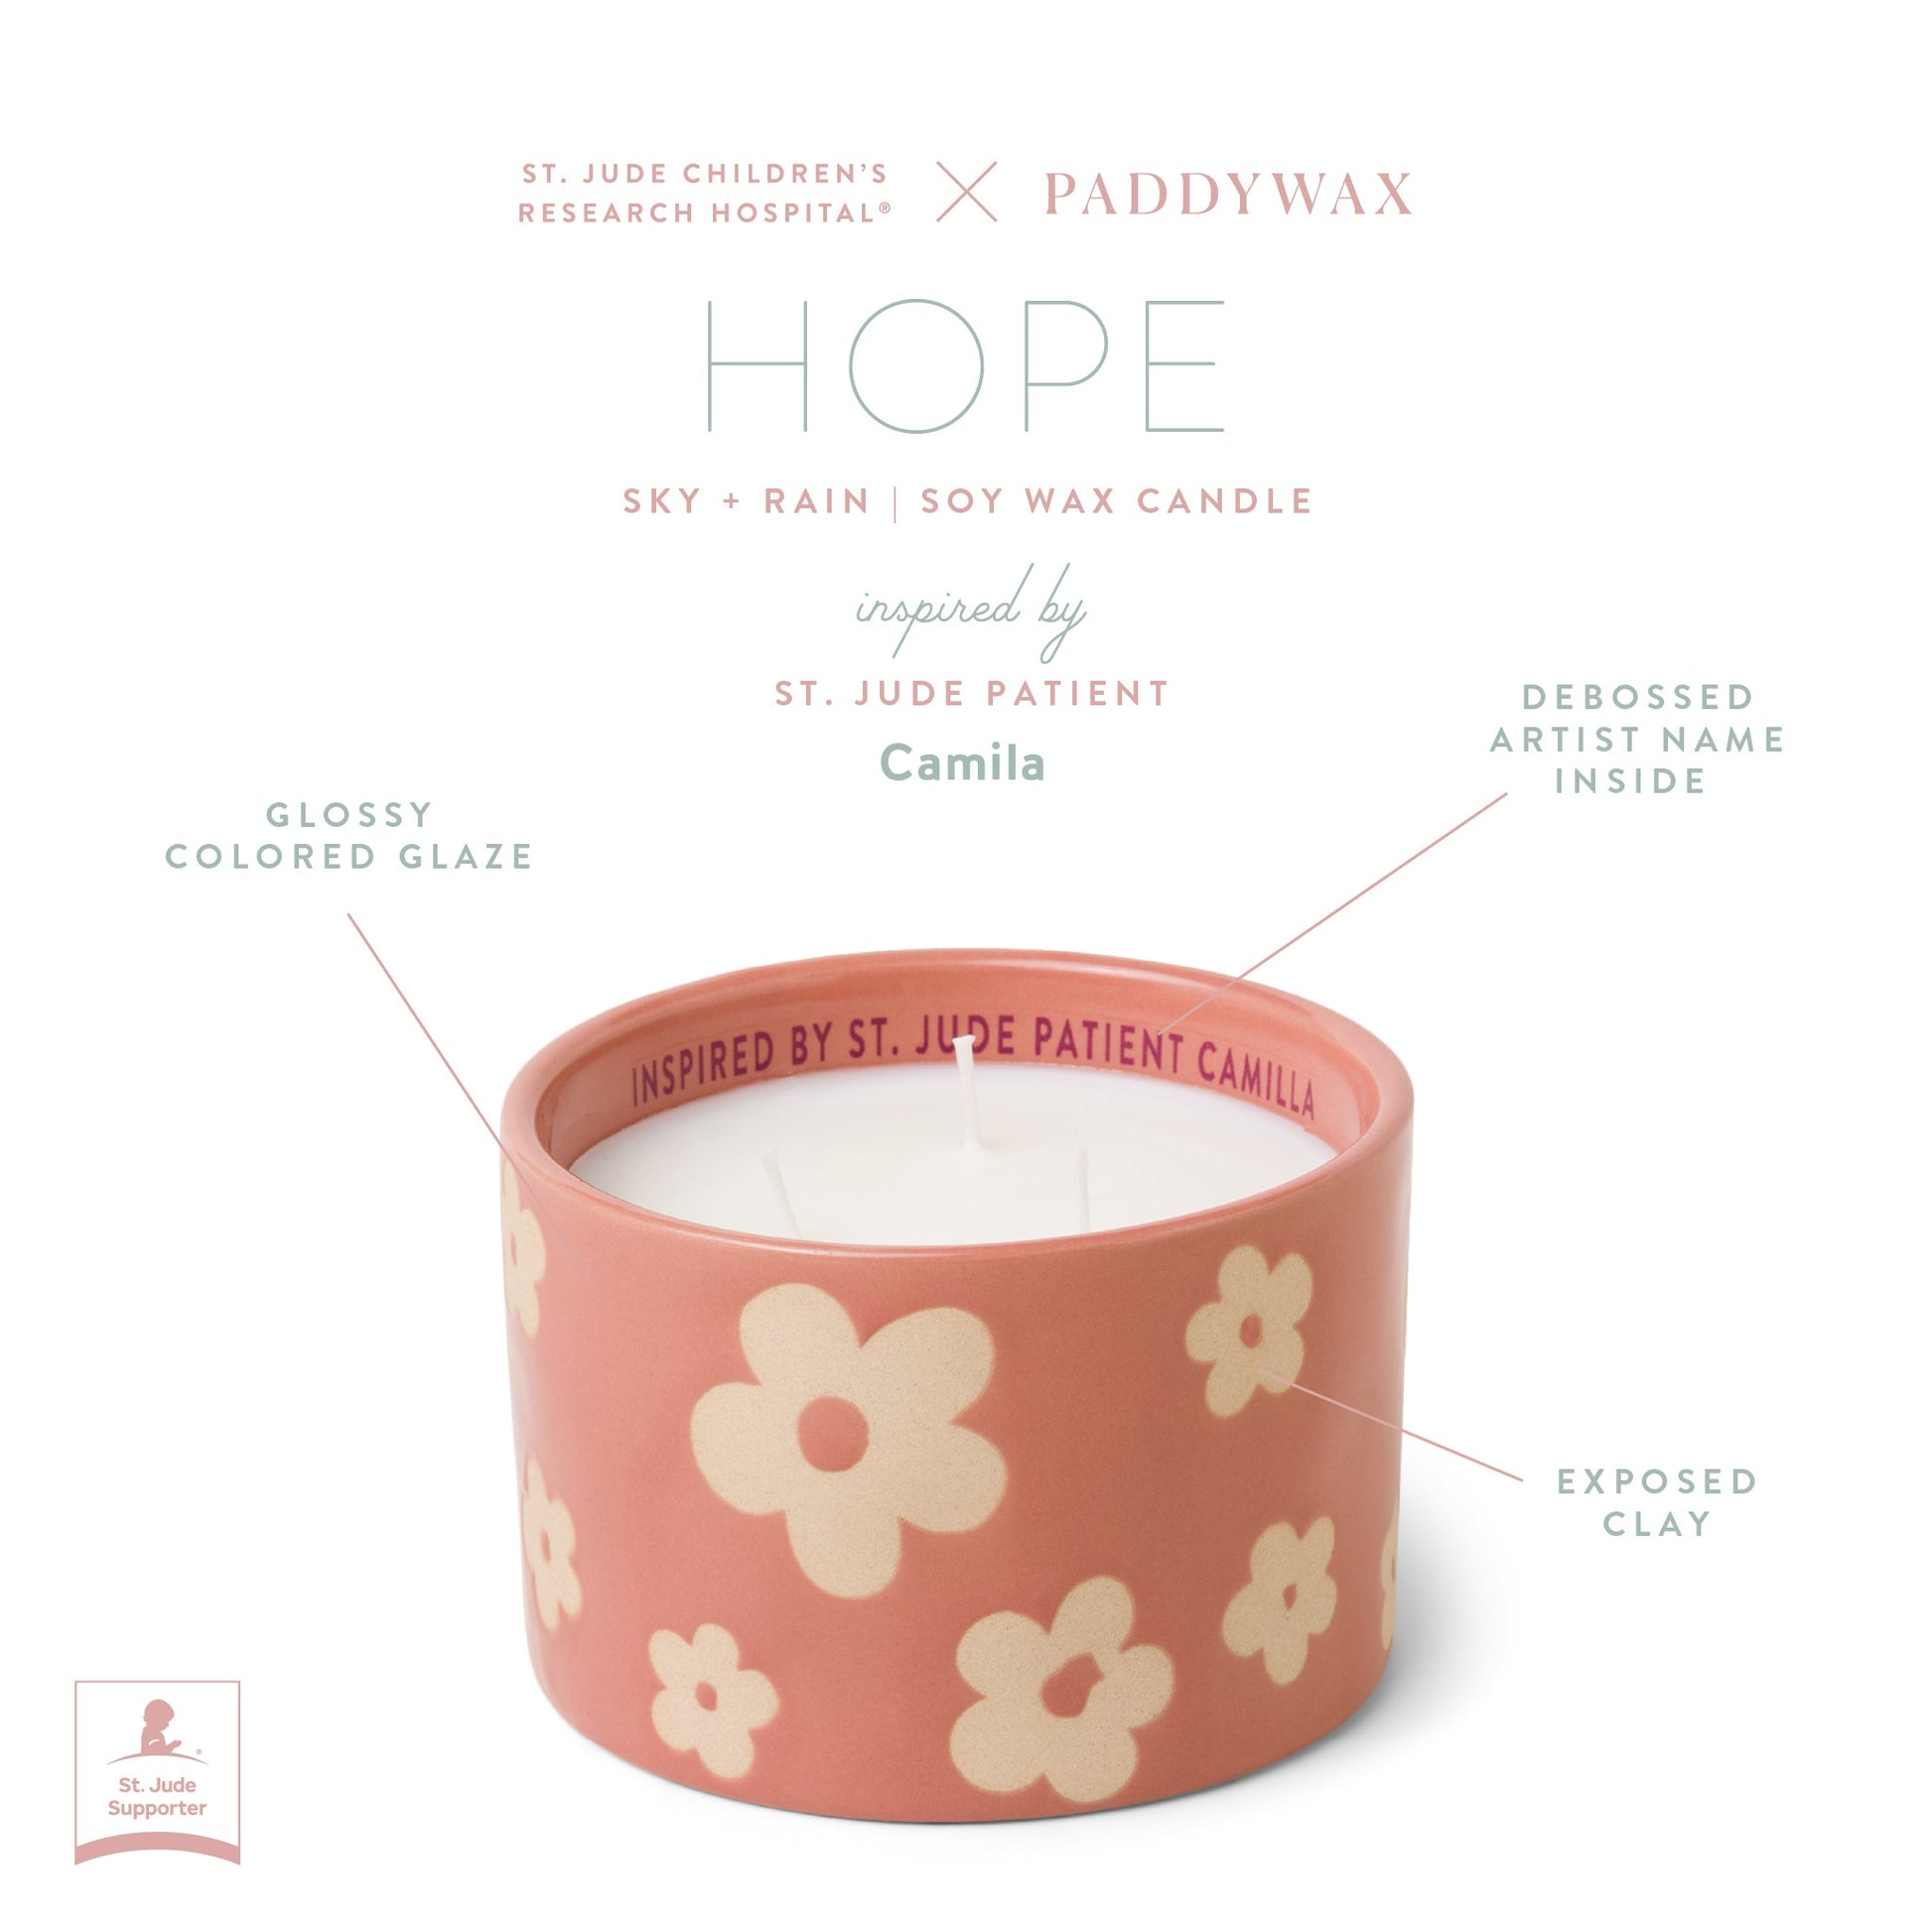 Infographic of pink ceramic candle with product features text "St. Jude Children's Research Hospital ® x Paddywax Hope Sky + Rain Soy Wax Candle inspired by St. Jude Patient Camila. Glossy colored glazed. Debossed artist name inside. Exposed clay."